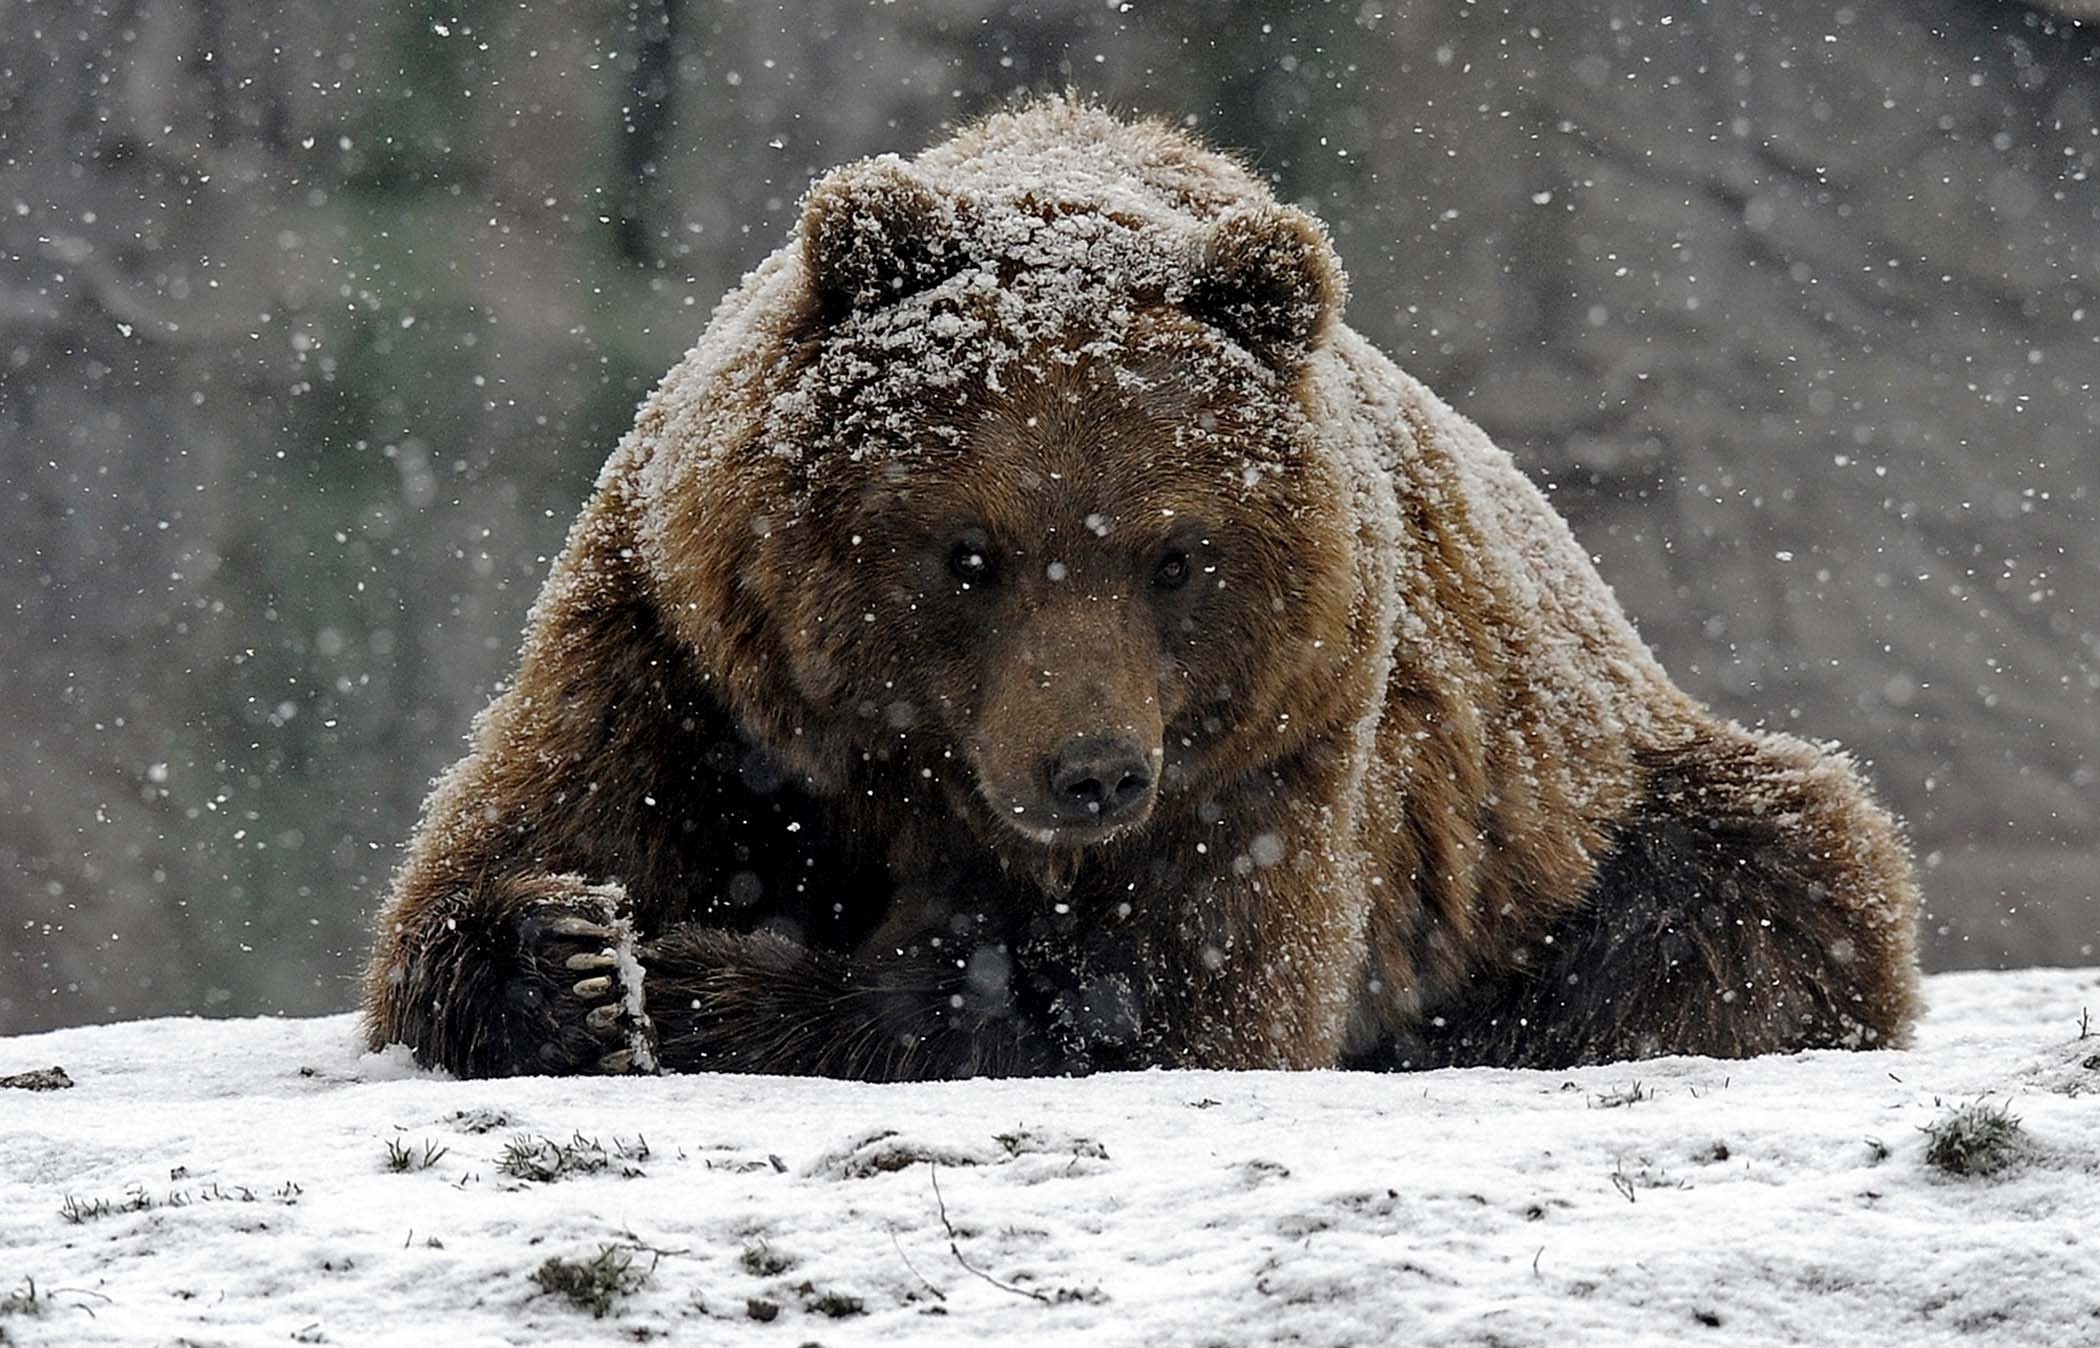 General 2100x1348 animals bears mammals snow cold outdoors winter